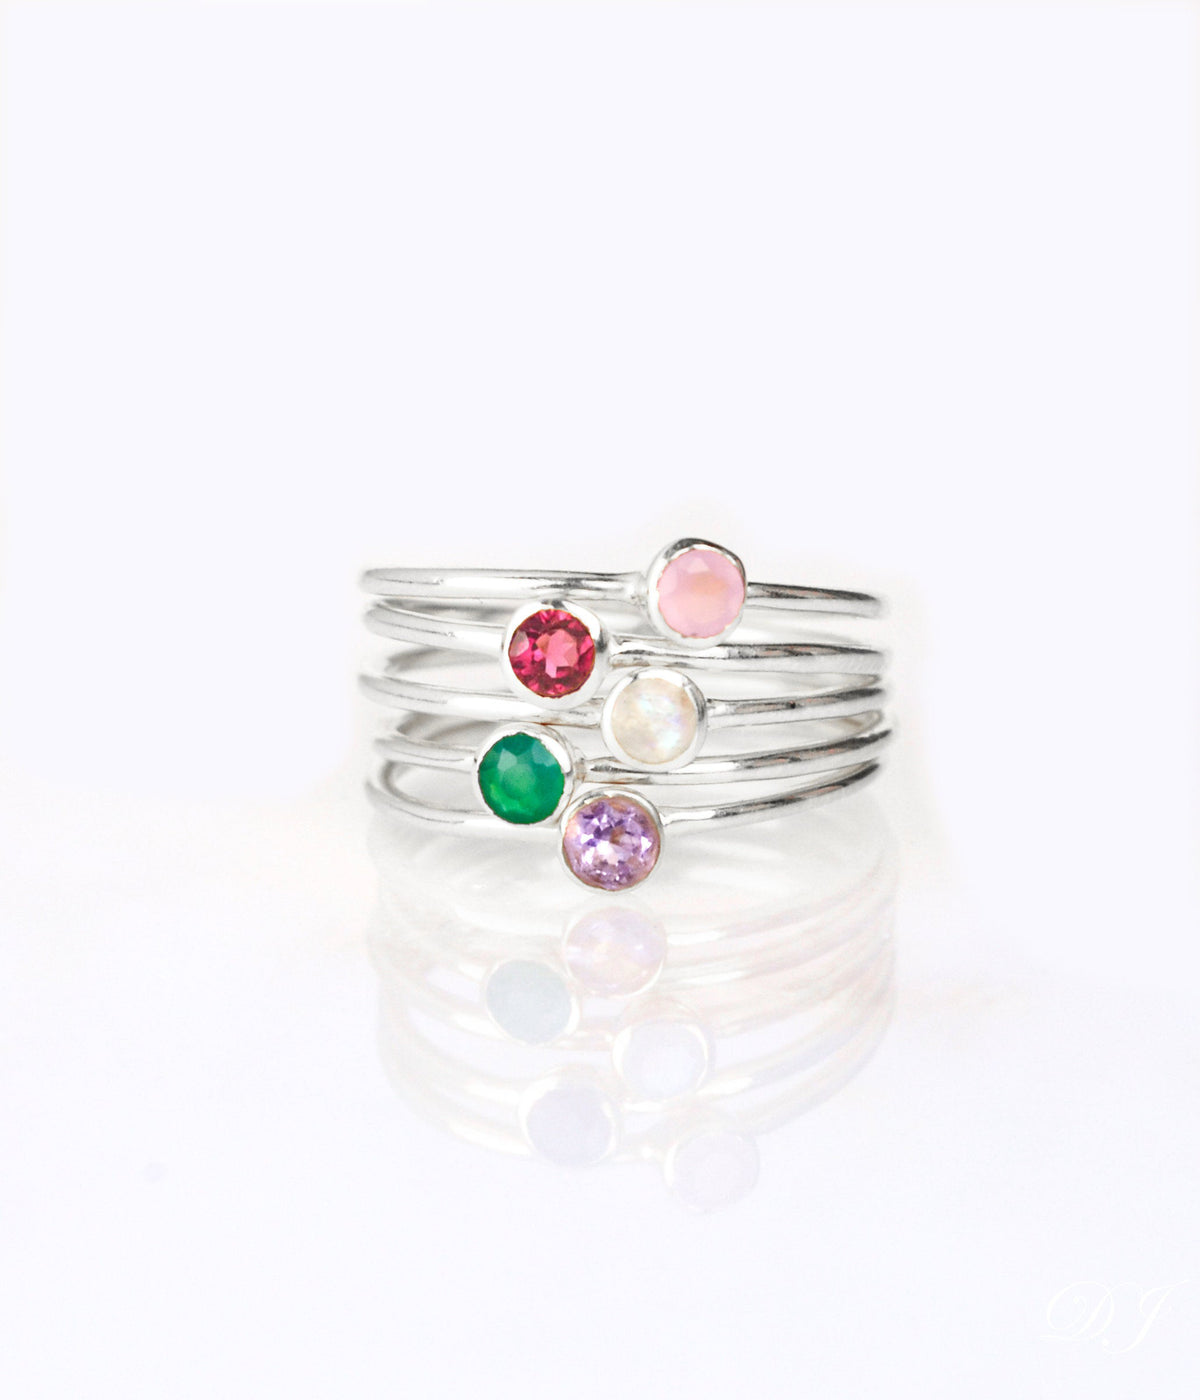 Chamilia Stackable Rings- Your Story Continues #Review #ChristmasMDR16 - Mom  Does Reviews